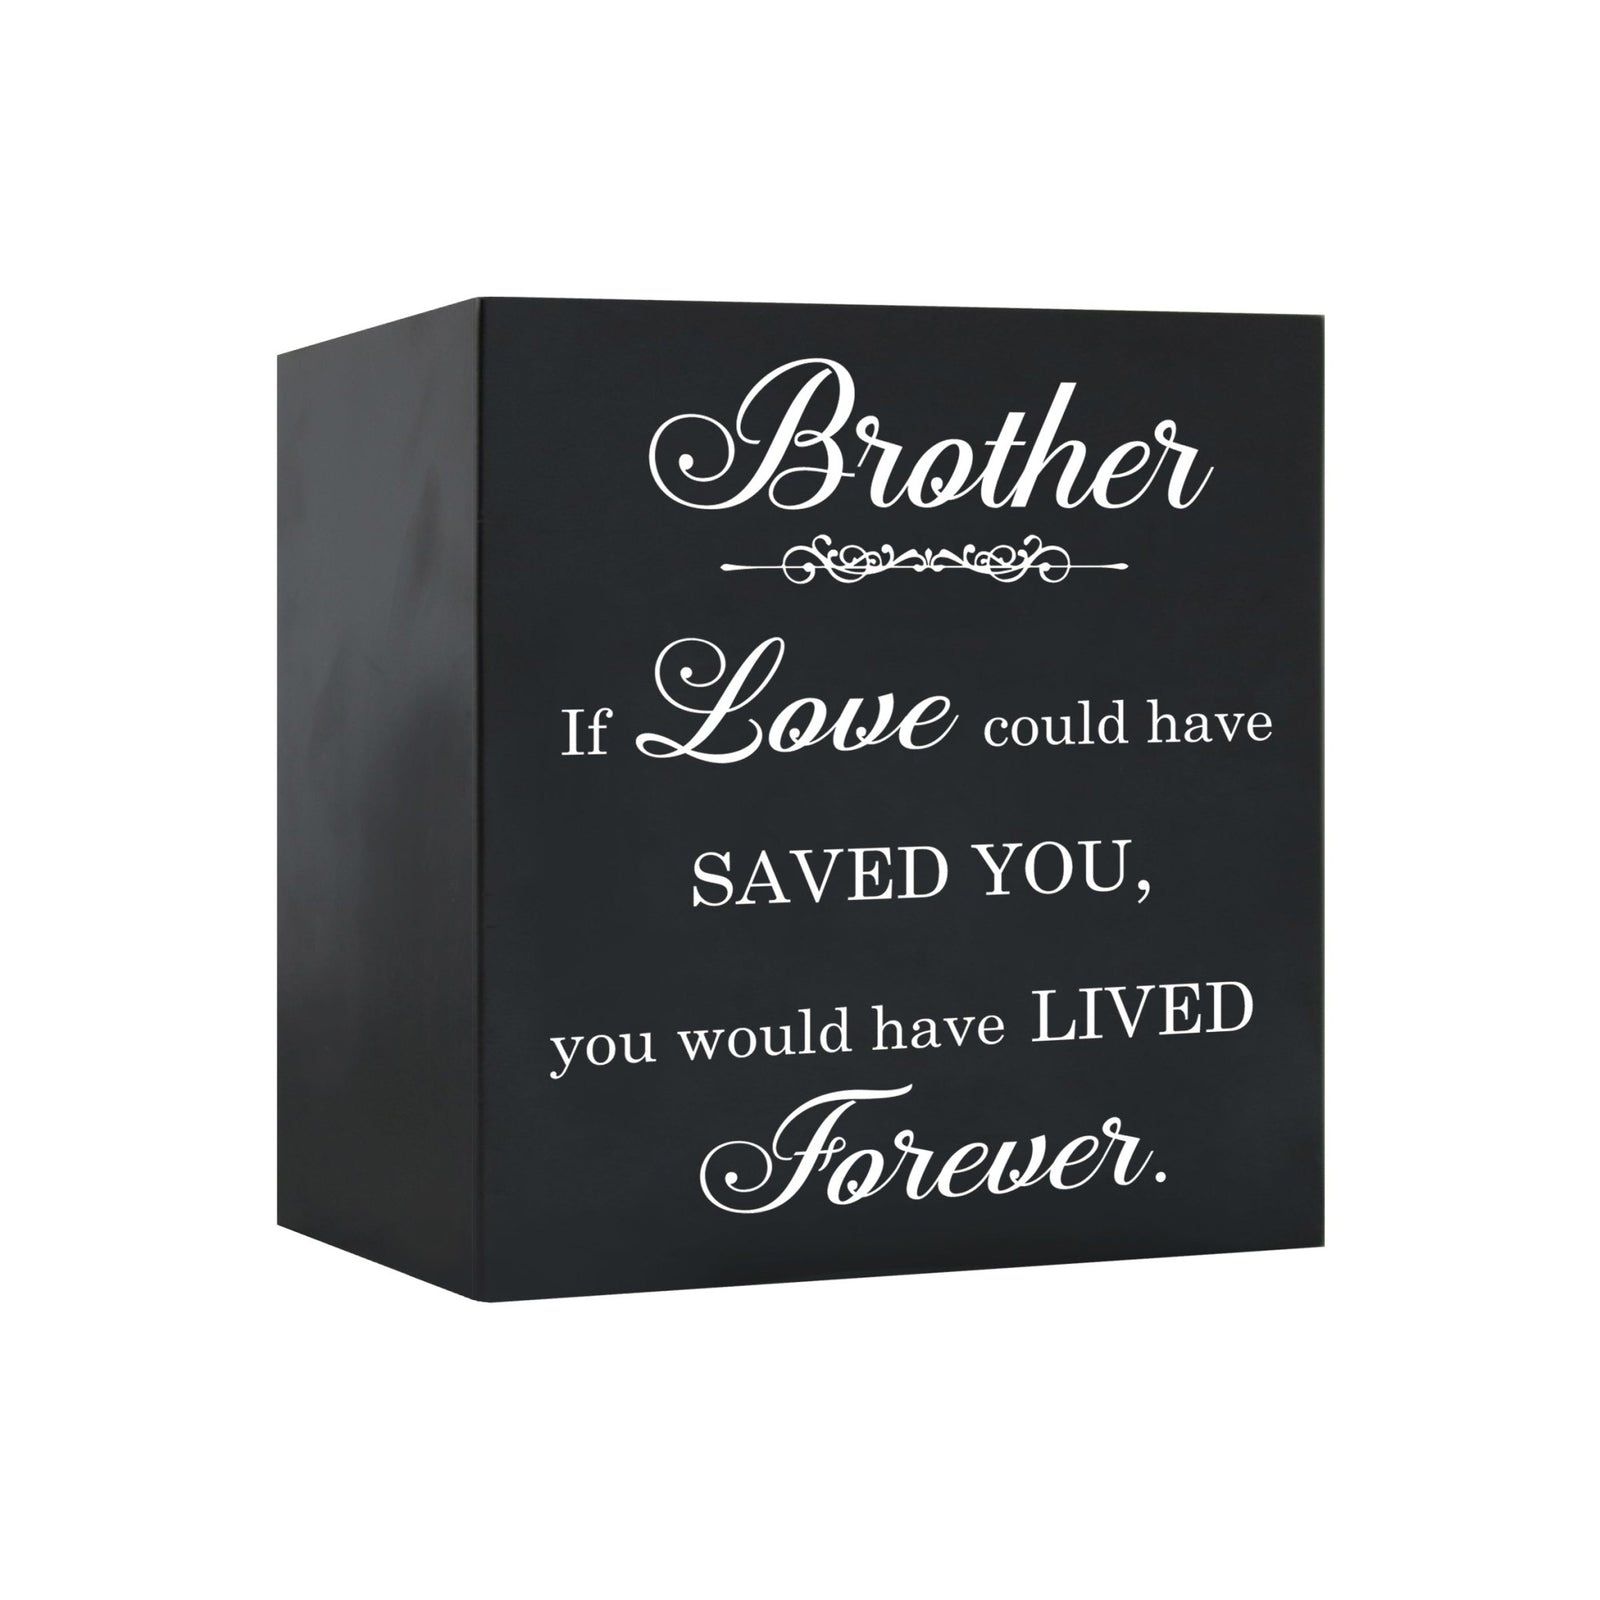 Memorial Bereavement Keepsake Cremation Shadow Box and Urn 6x6in Holds 53 Cu Inches Of Human Ashes Brother, If Love Could - LifeSong Milestones